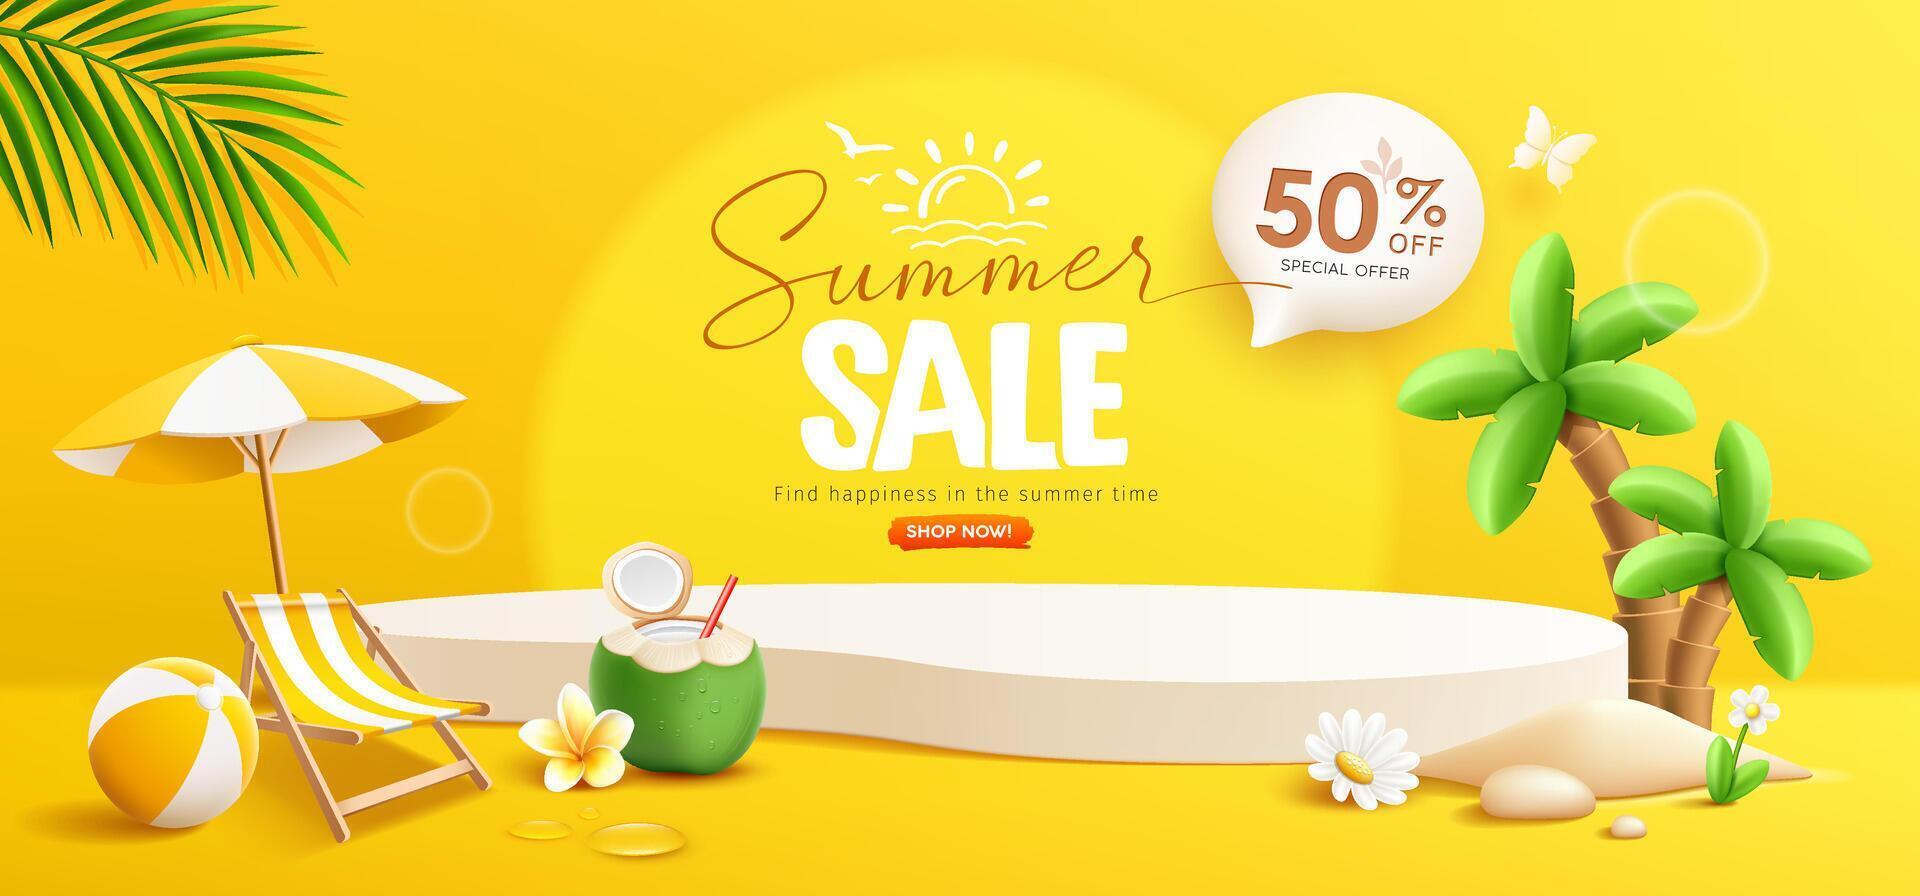 Summer sale podium display, pile of sand, flowers, coconut tree, beach umbrella, beach chair and beach ball, speech bubble space banner design, on yellow background, EPS 10 vector illustration